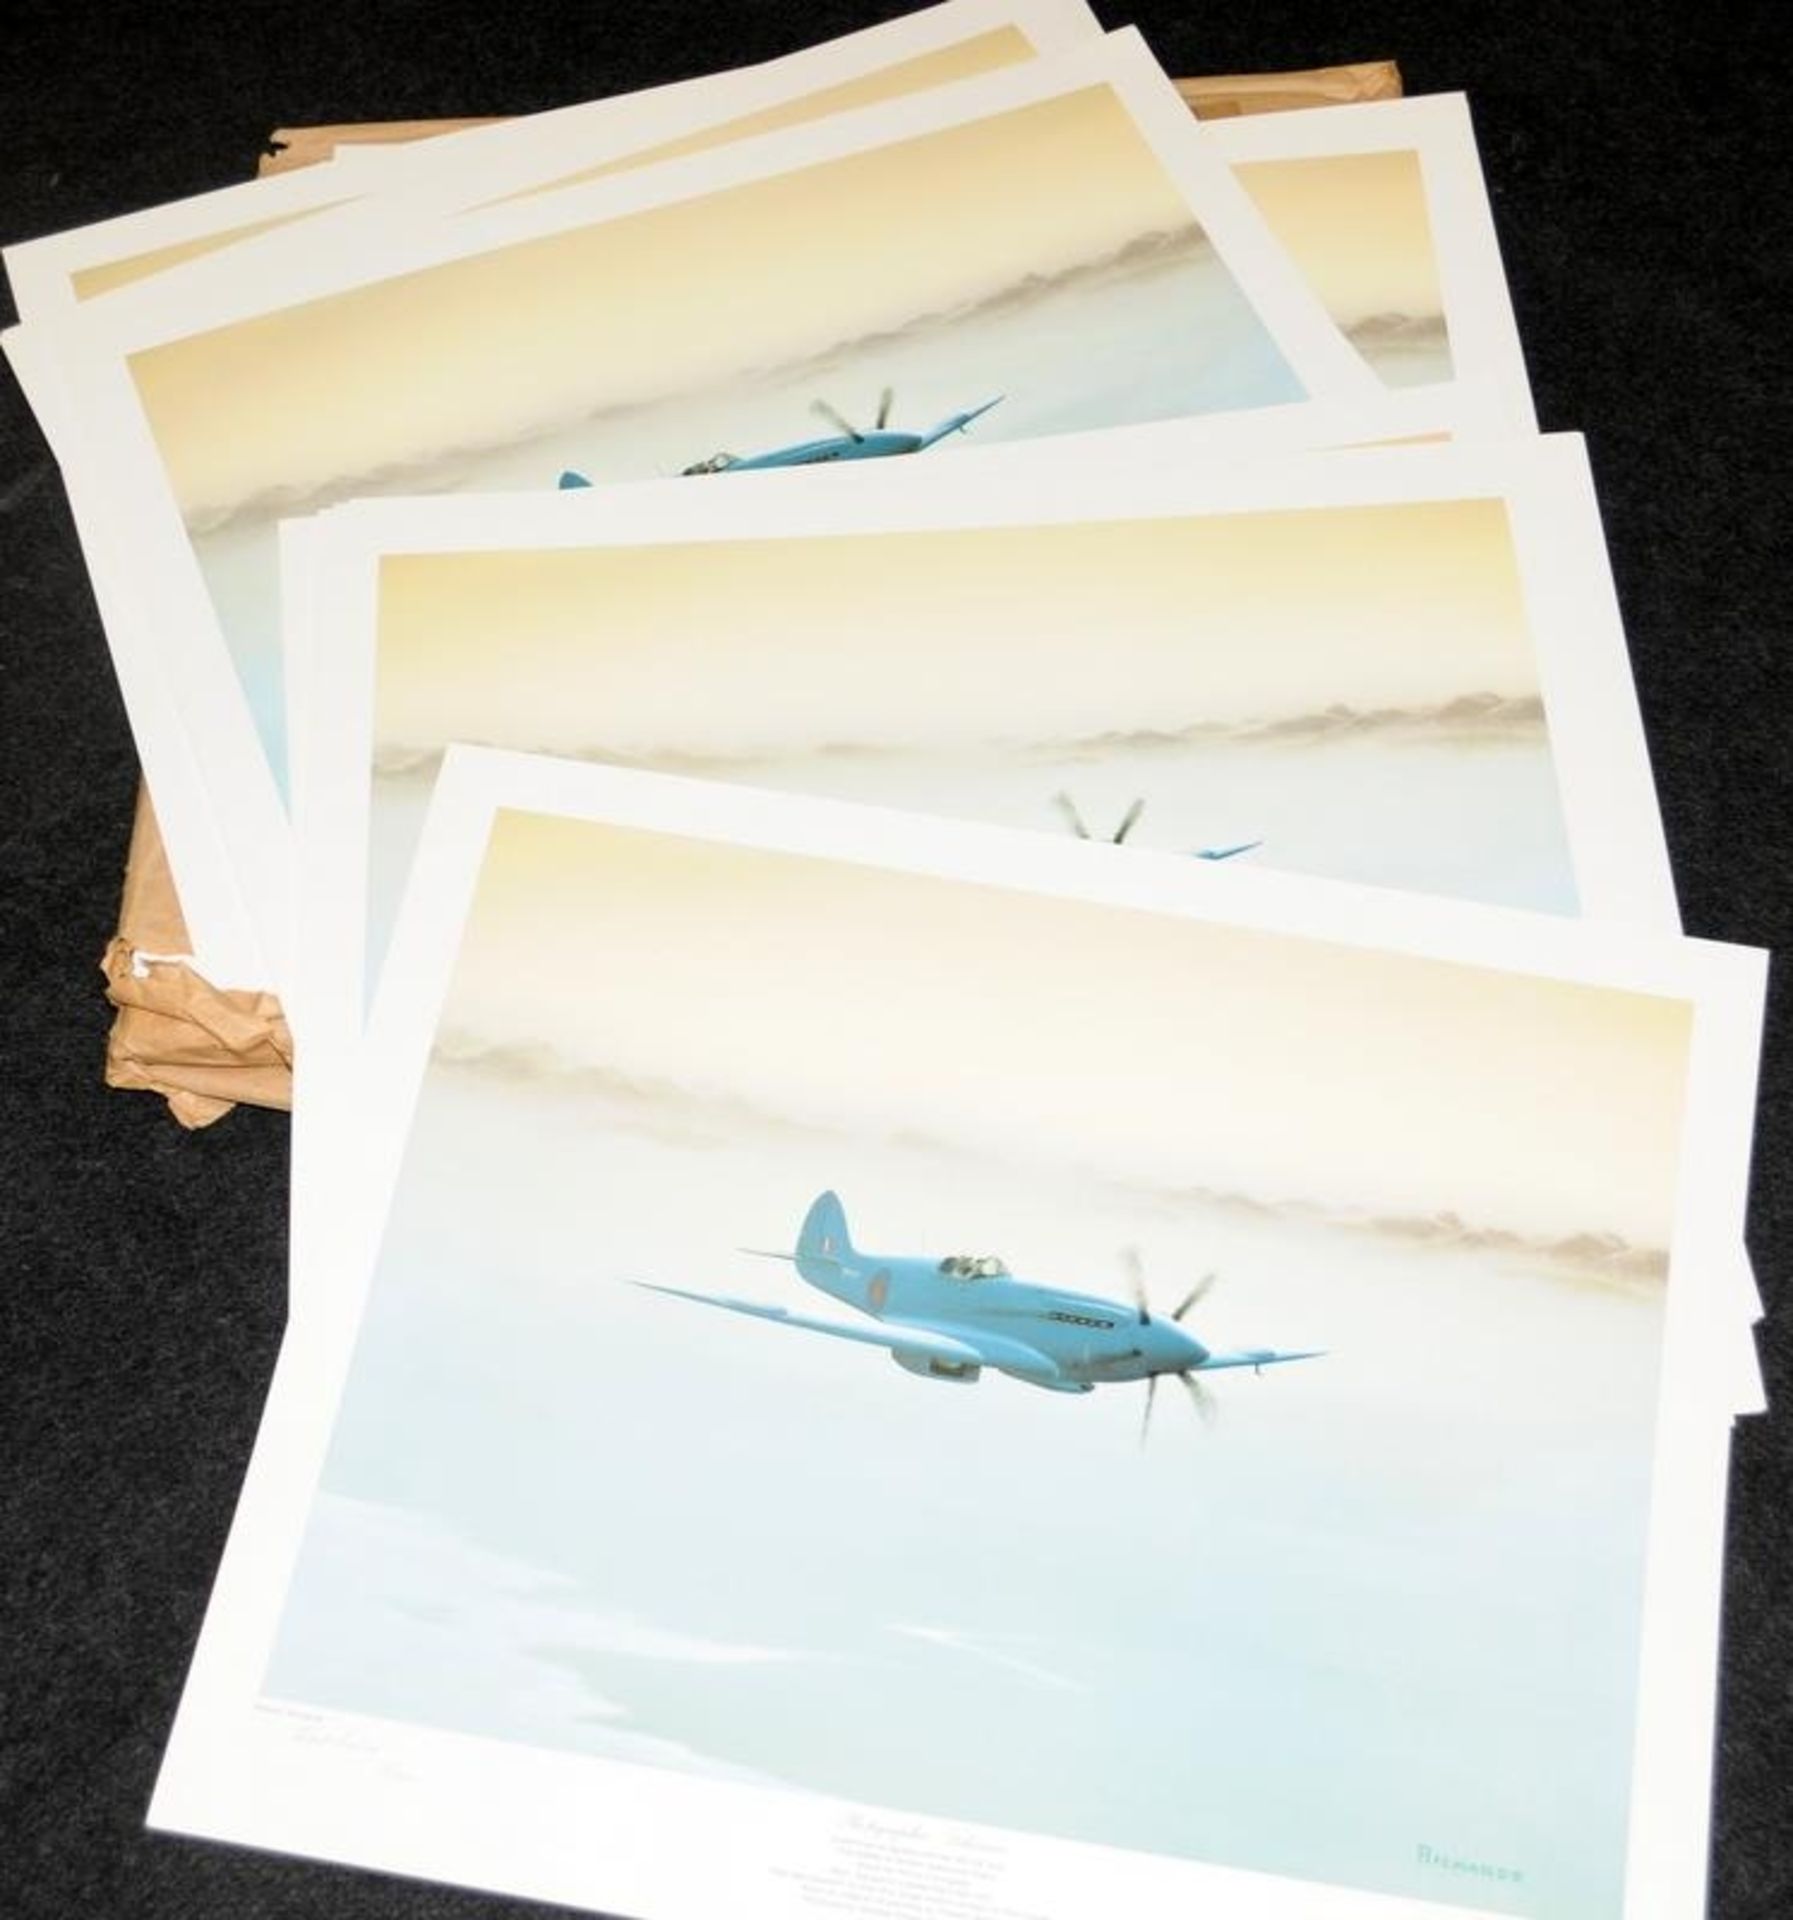 Very large quantity of signed and numbered prints 'Photographic Likeness' featuring Supermarine